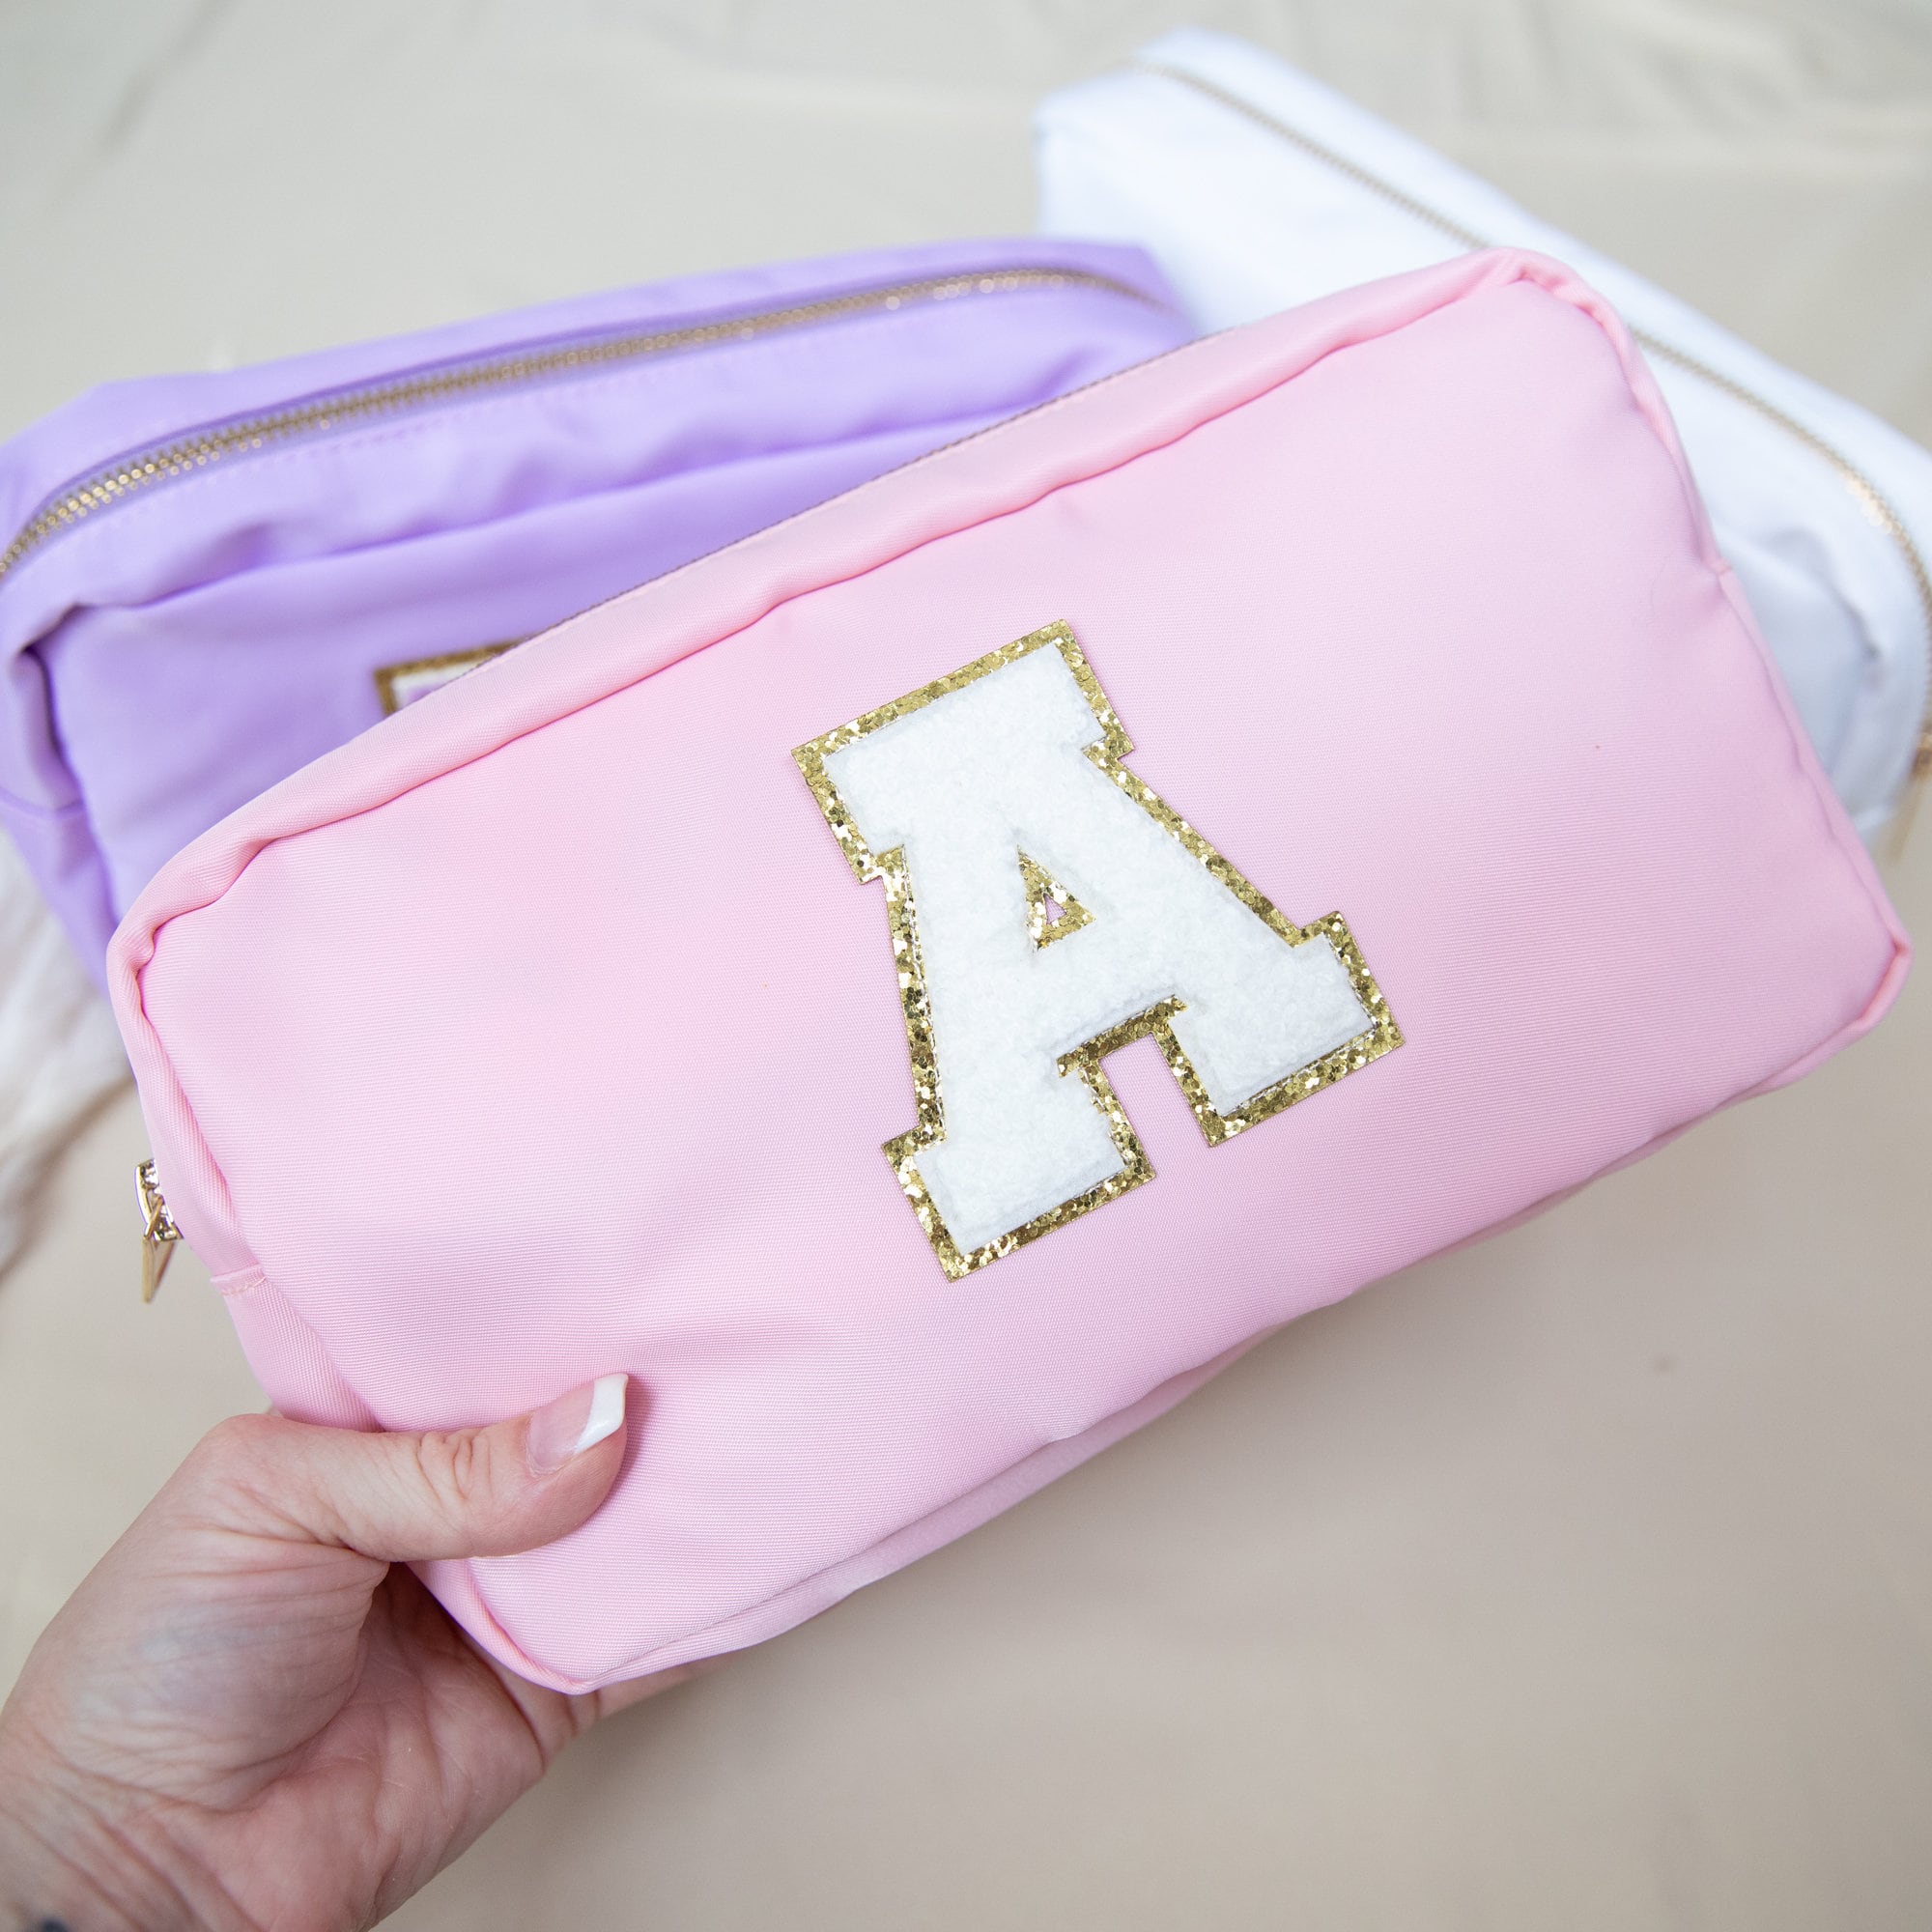 Easy Iron On Back to School Pencil Case